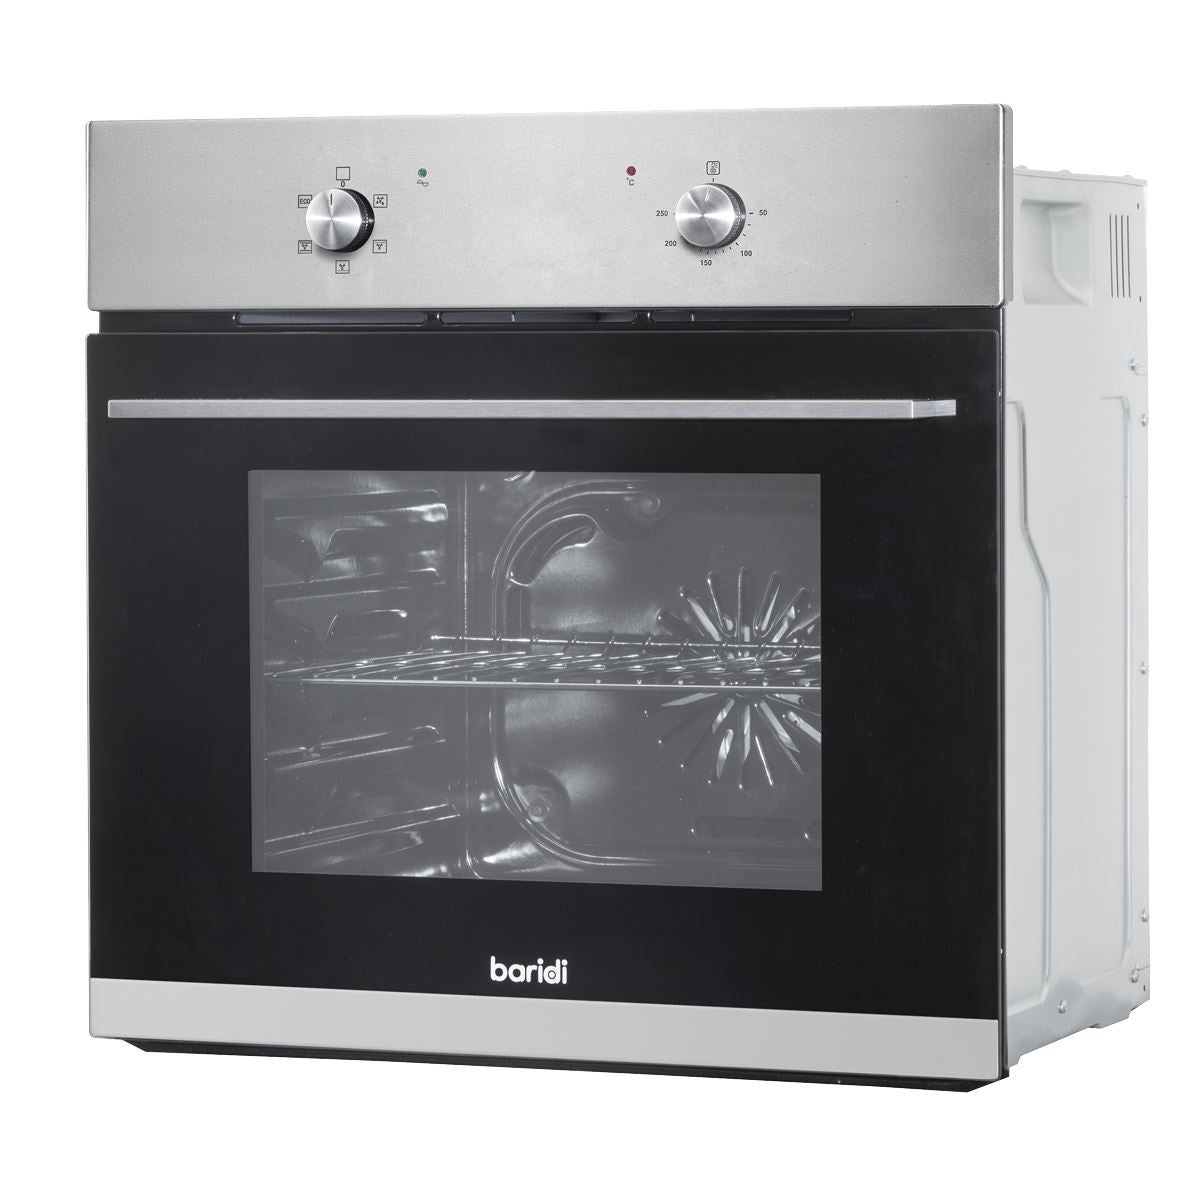 Baridi 60cm Built-In Five Function Fan Assisted Oven, 55L Capacity, Stainless Steel